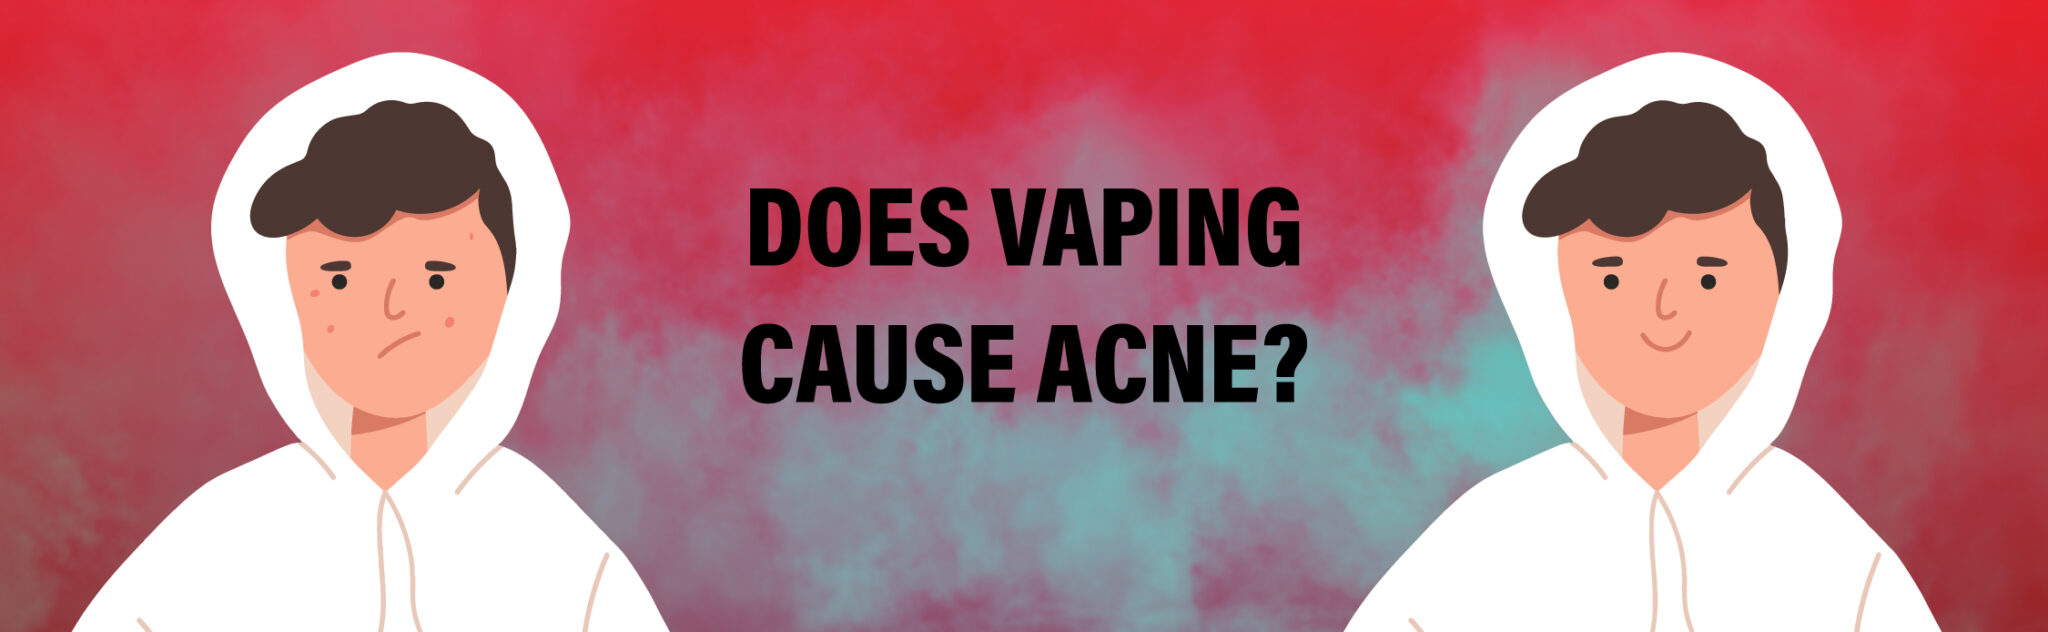 does vaping cause acne